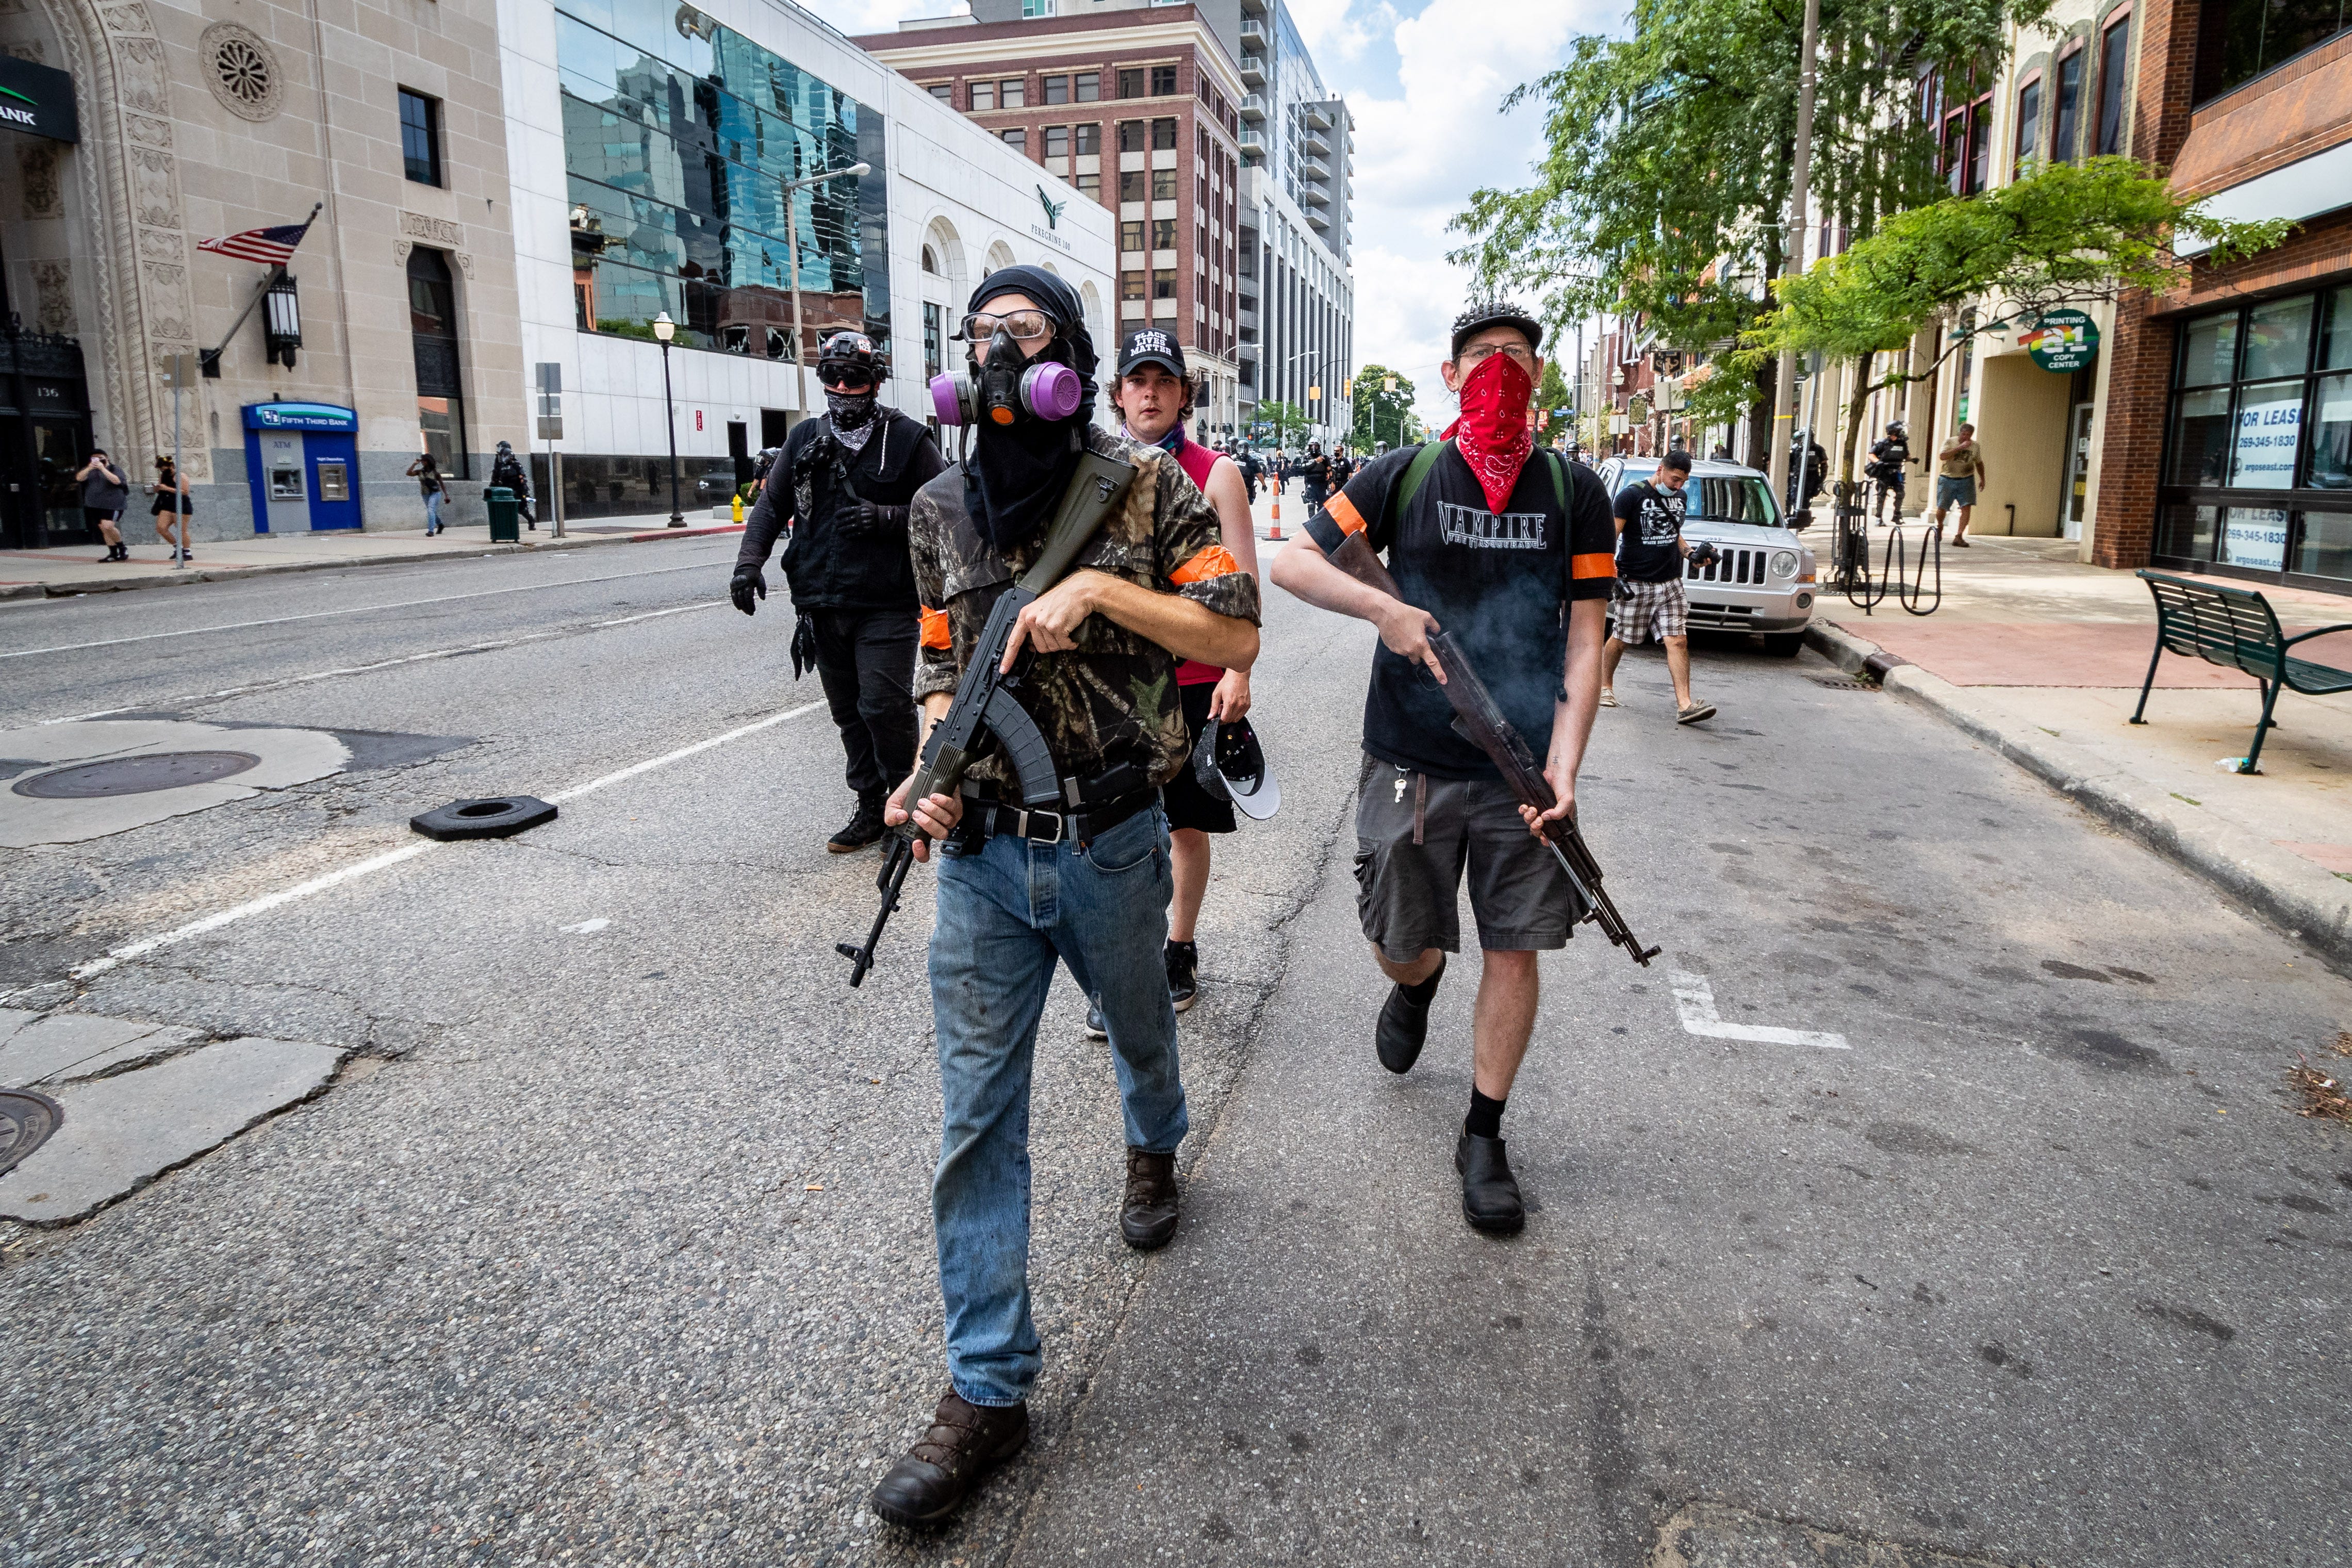 Antifa members carry assault weapons in downtown Kalamazoo protesting the presence of the Proud Boys. Members of Proud Boys, antifa, and a local church clash with each other and local and Michigan State Police at Arcadia Creek Festival Plaza in Kalamazoo on August 15, 2020.